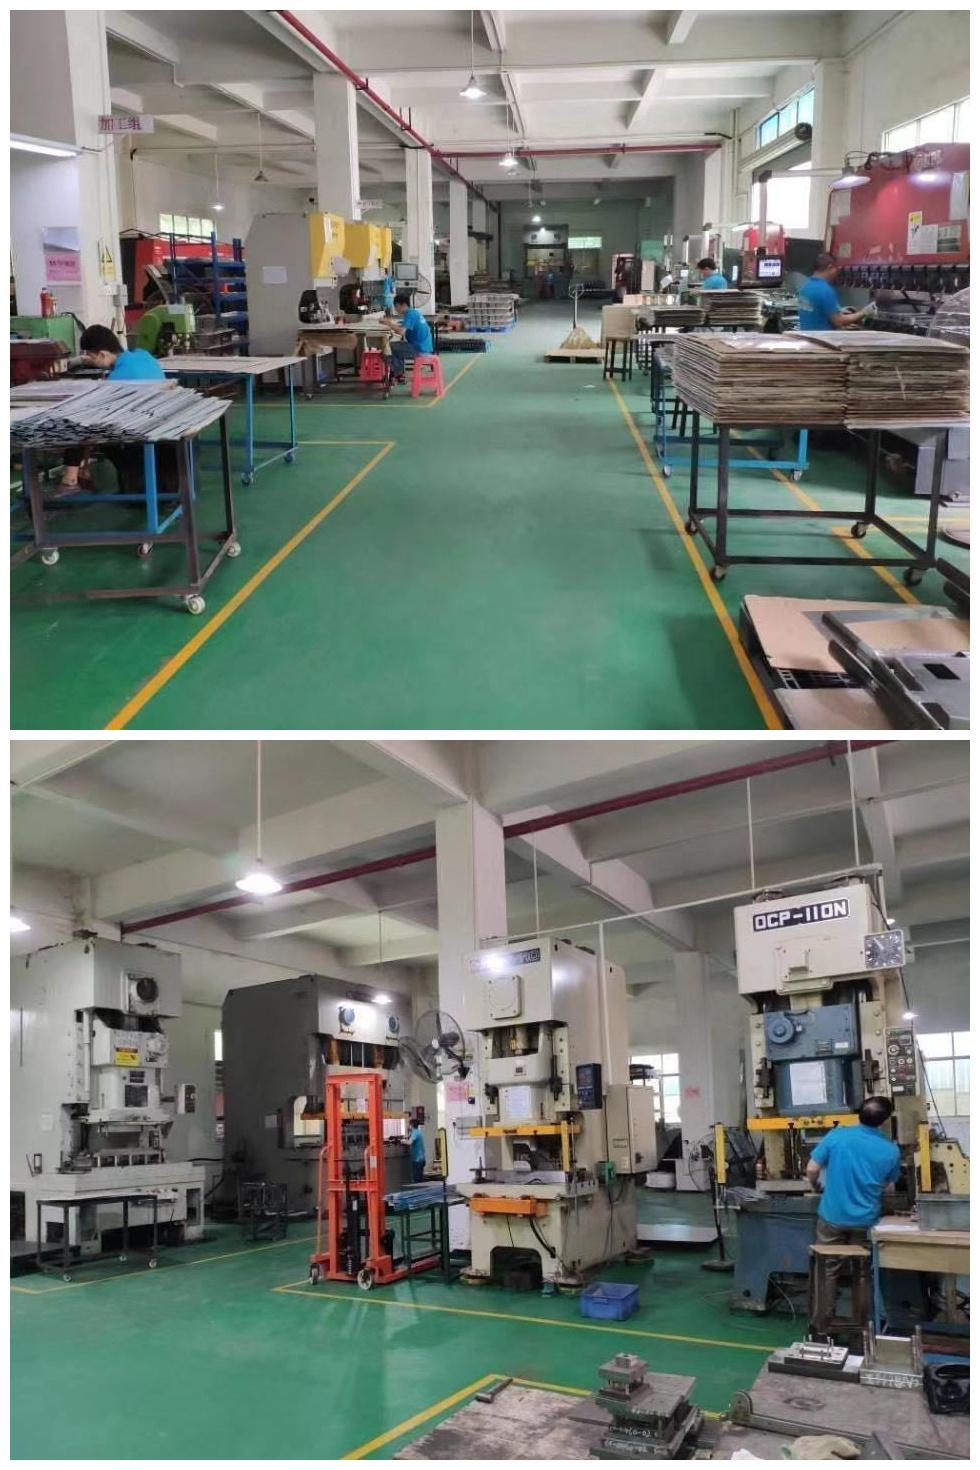 Super Manufactured Metal Parts Made in China With High Quality